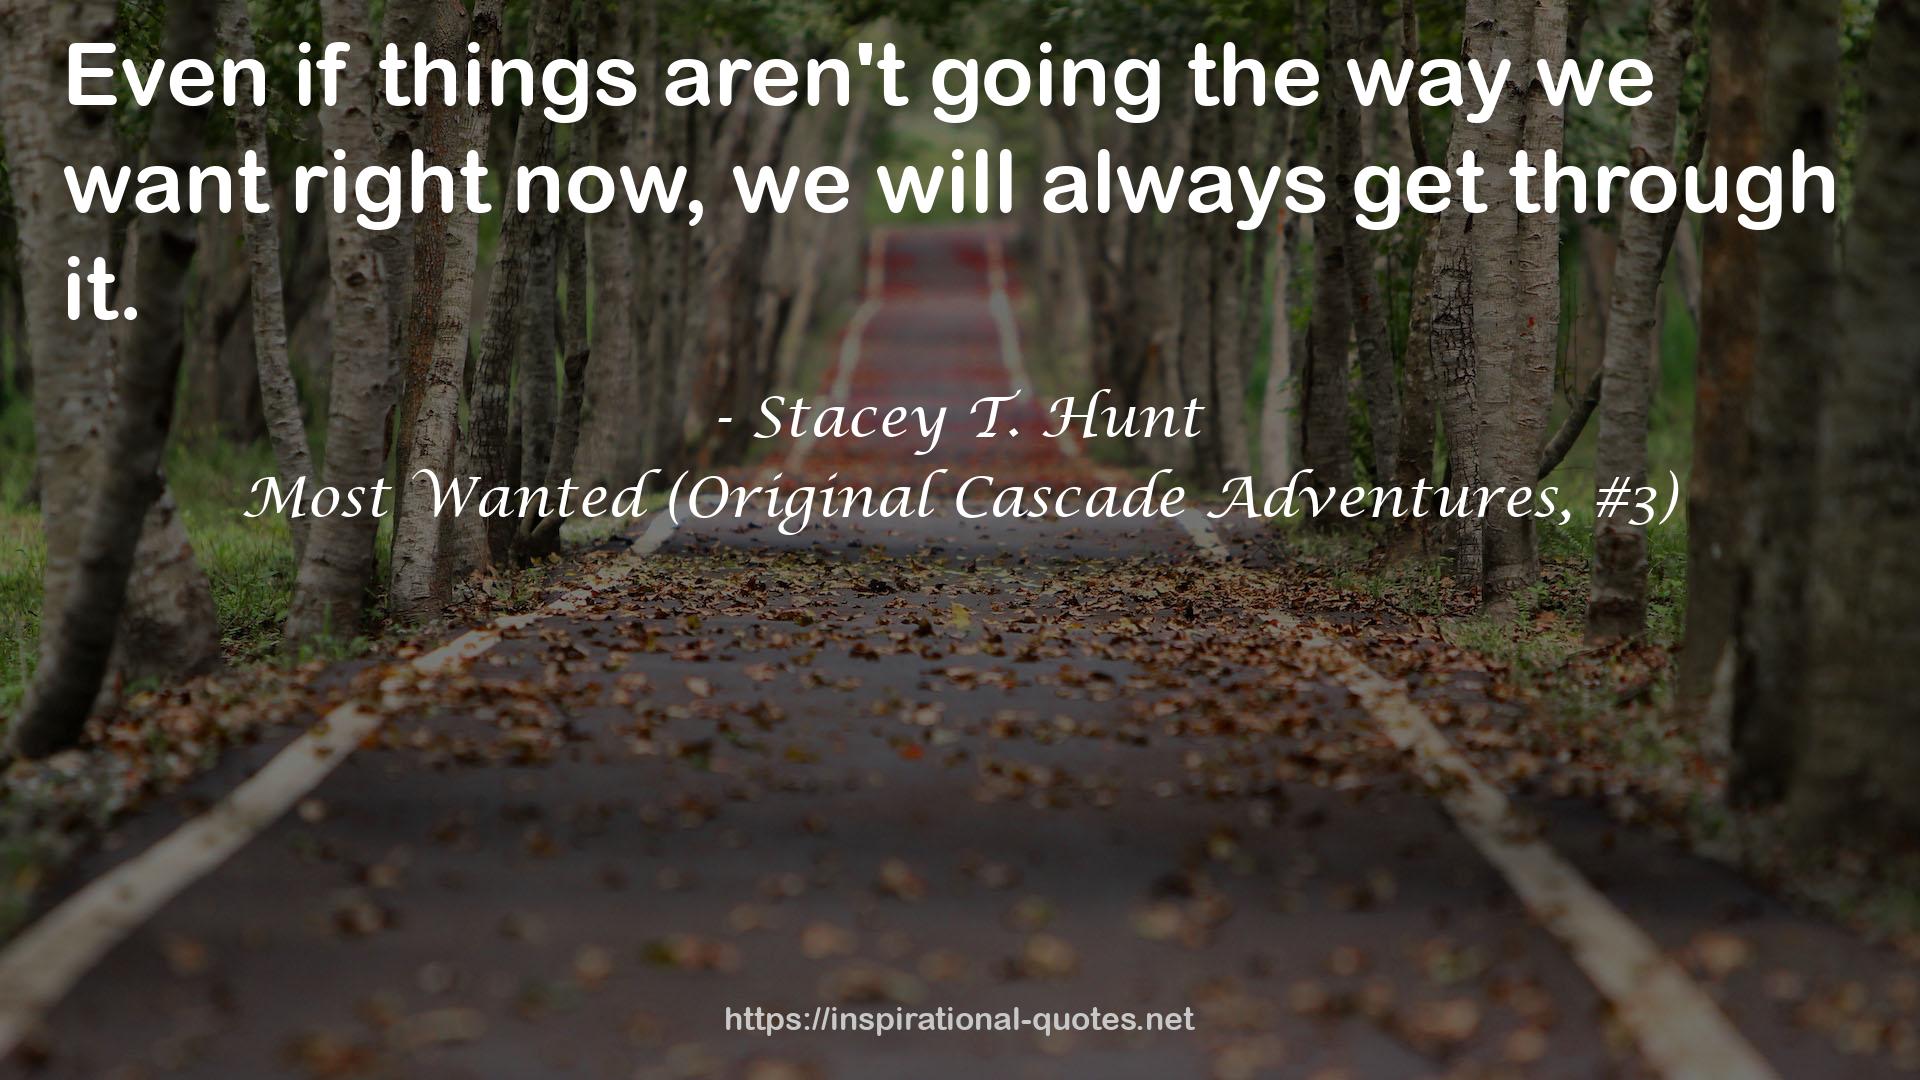 Stacey T. Hunt QUOTES